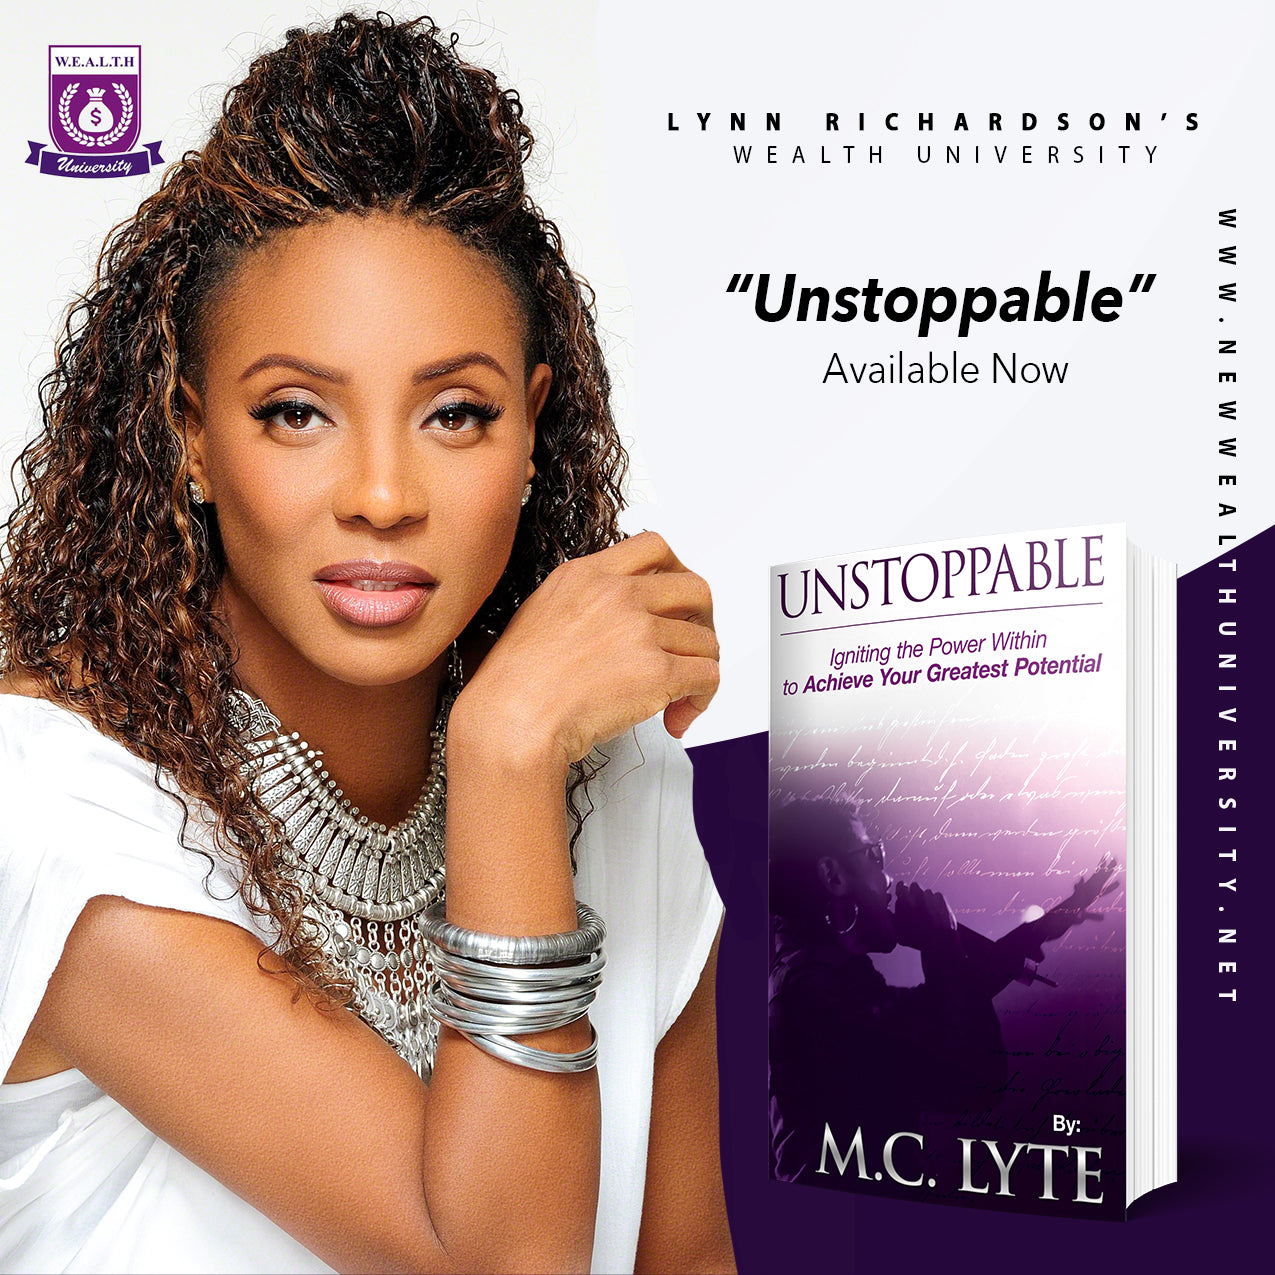 Unstoppable:  Igniting the Power Within to Achieve Your Greatest Potential